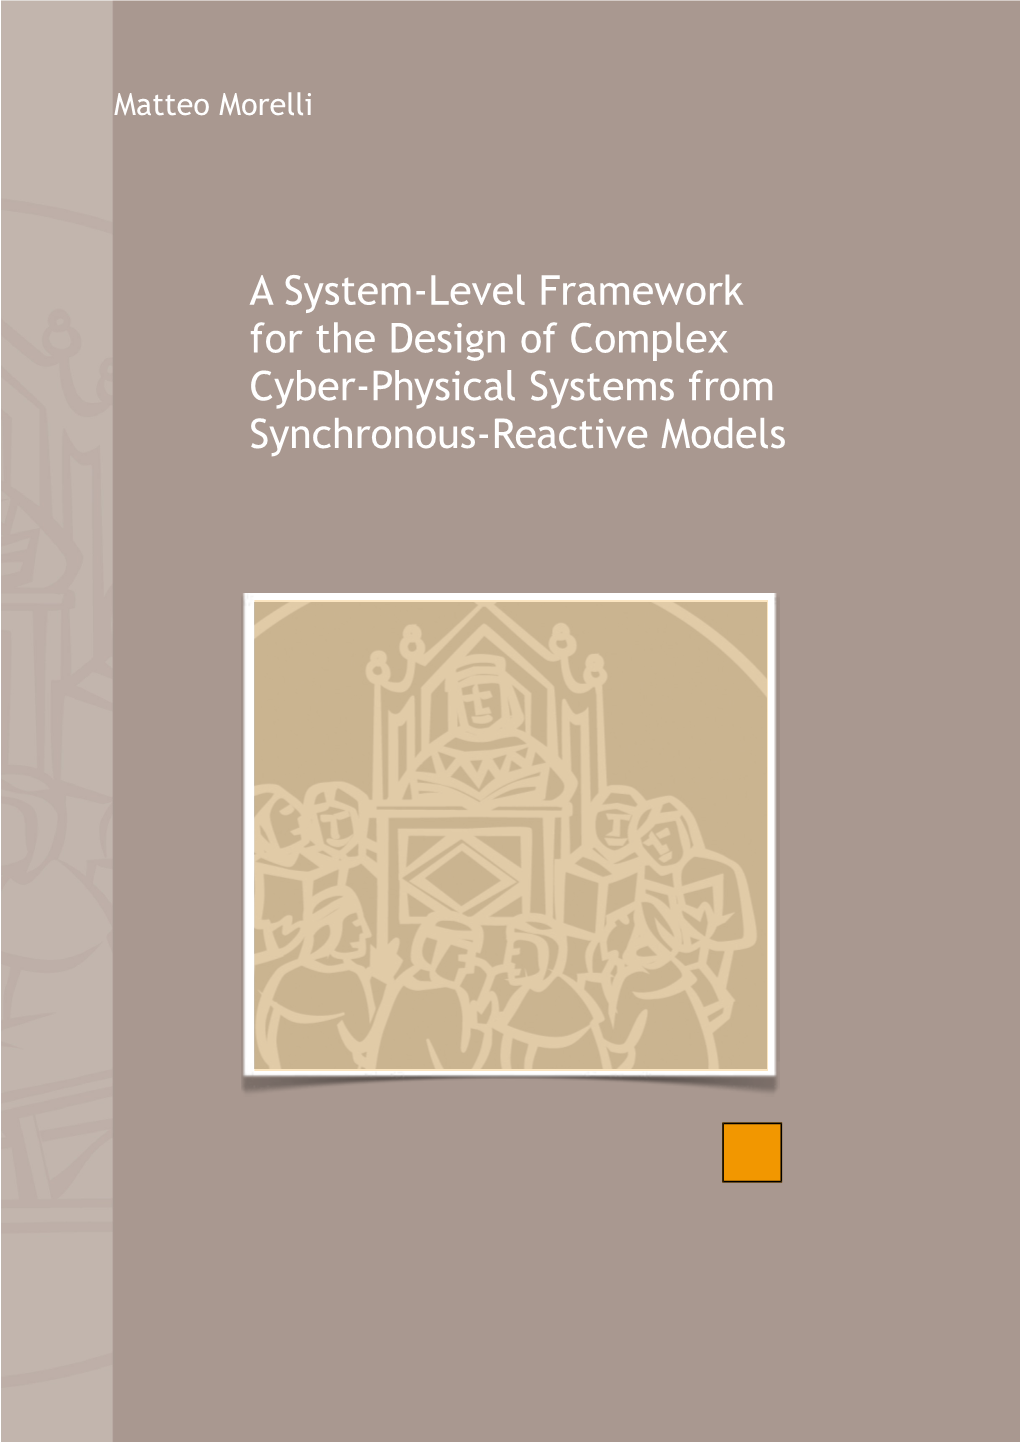 A System-Level Framework for the Design of Complex Cyber-Physical